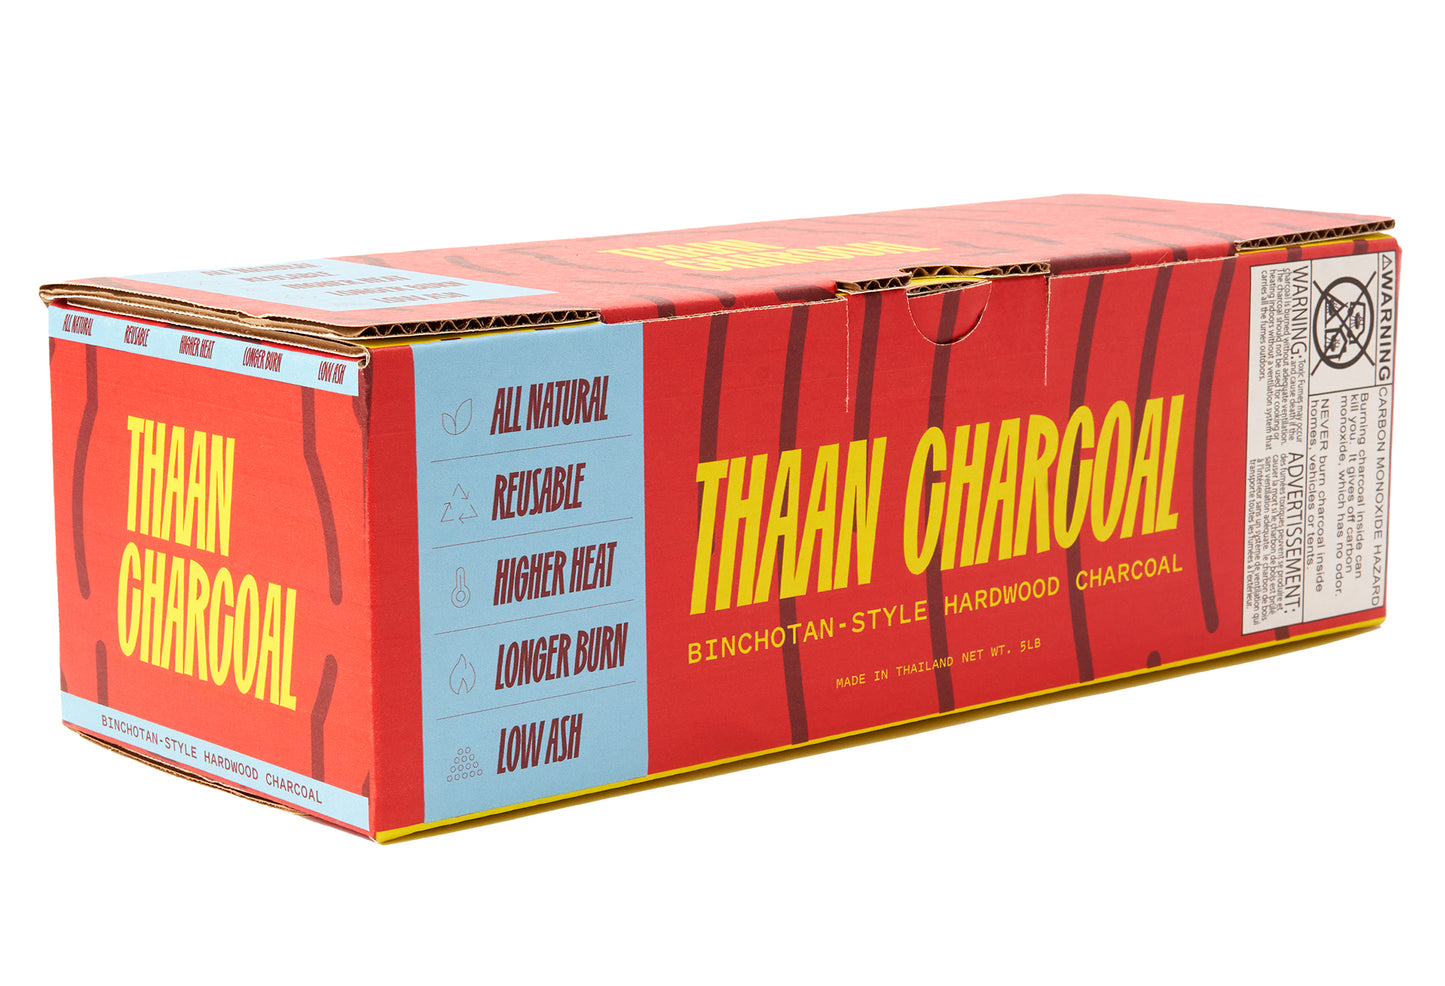 Thaan Charcoal, Chef's Choice Premium Grilling Charcoal, Log Style, 5lb